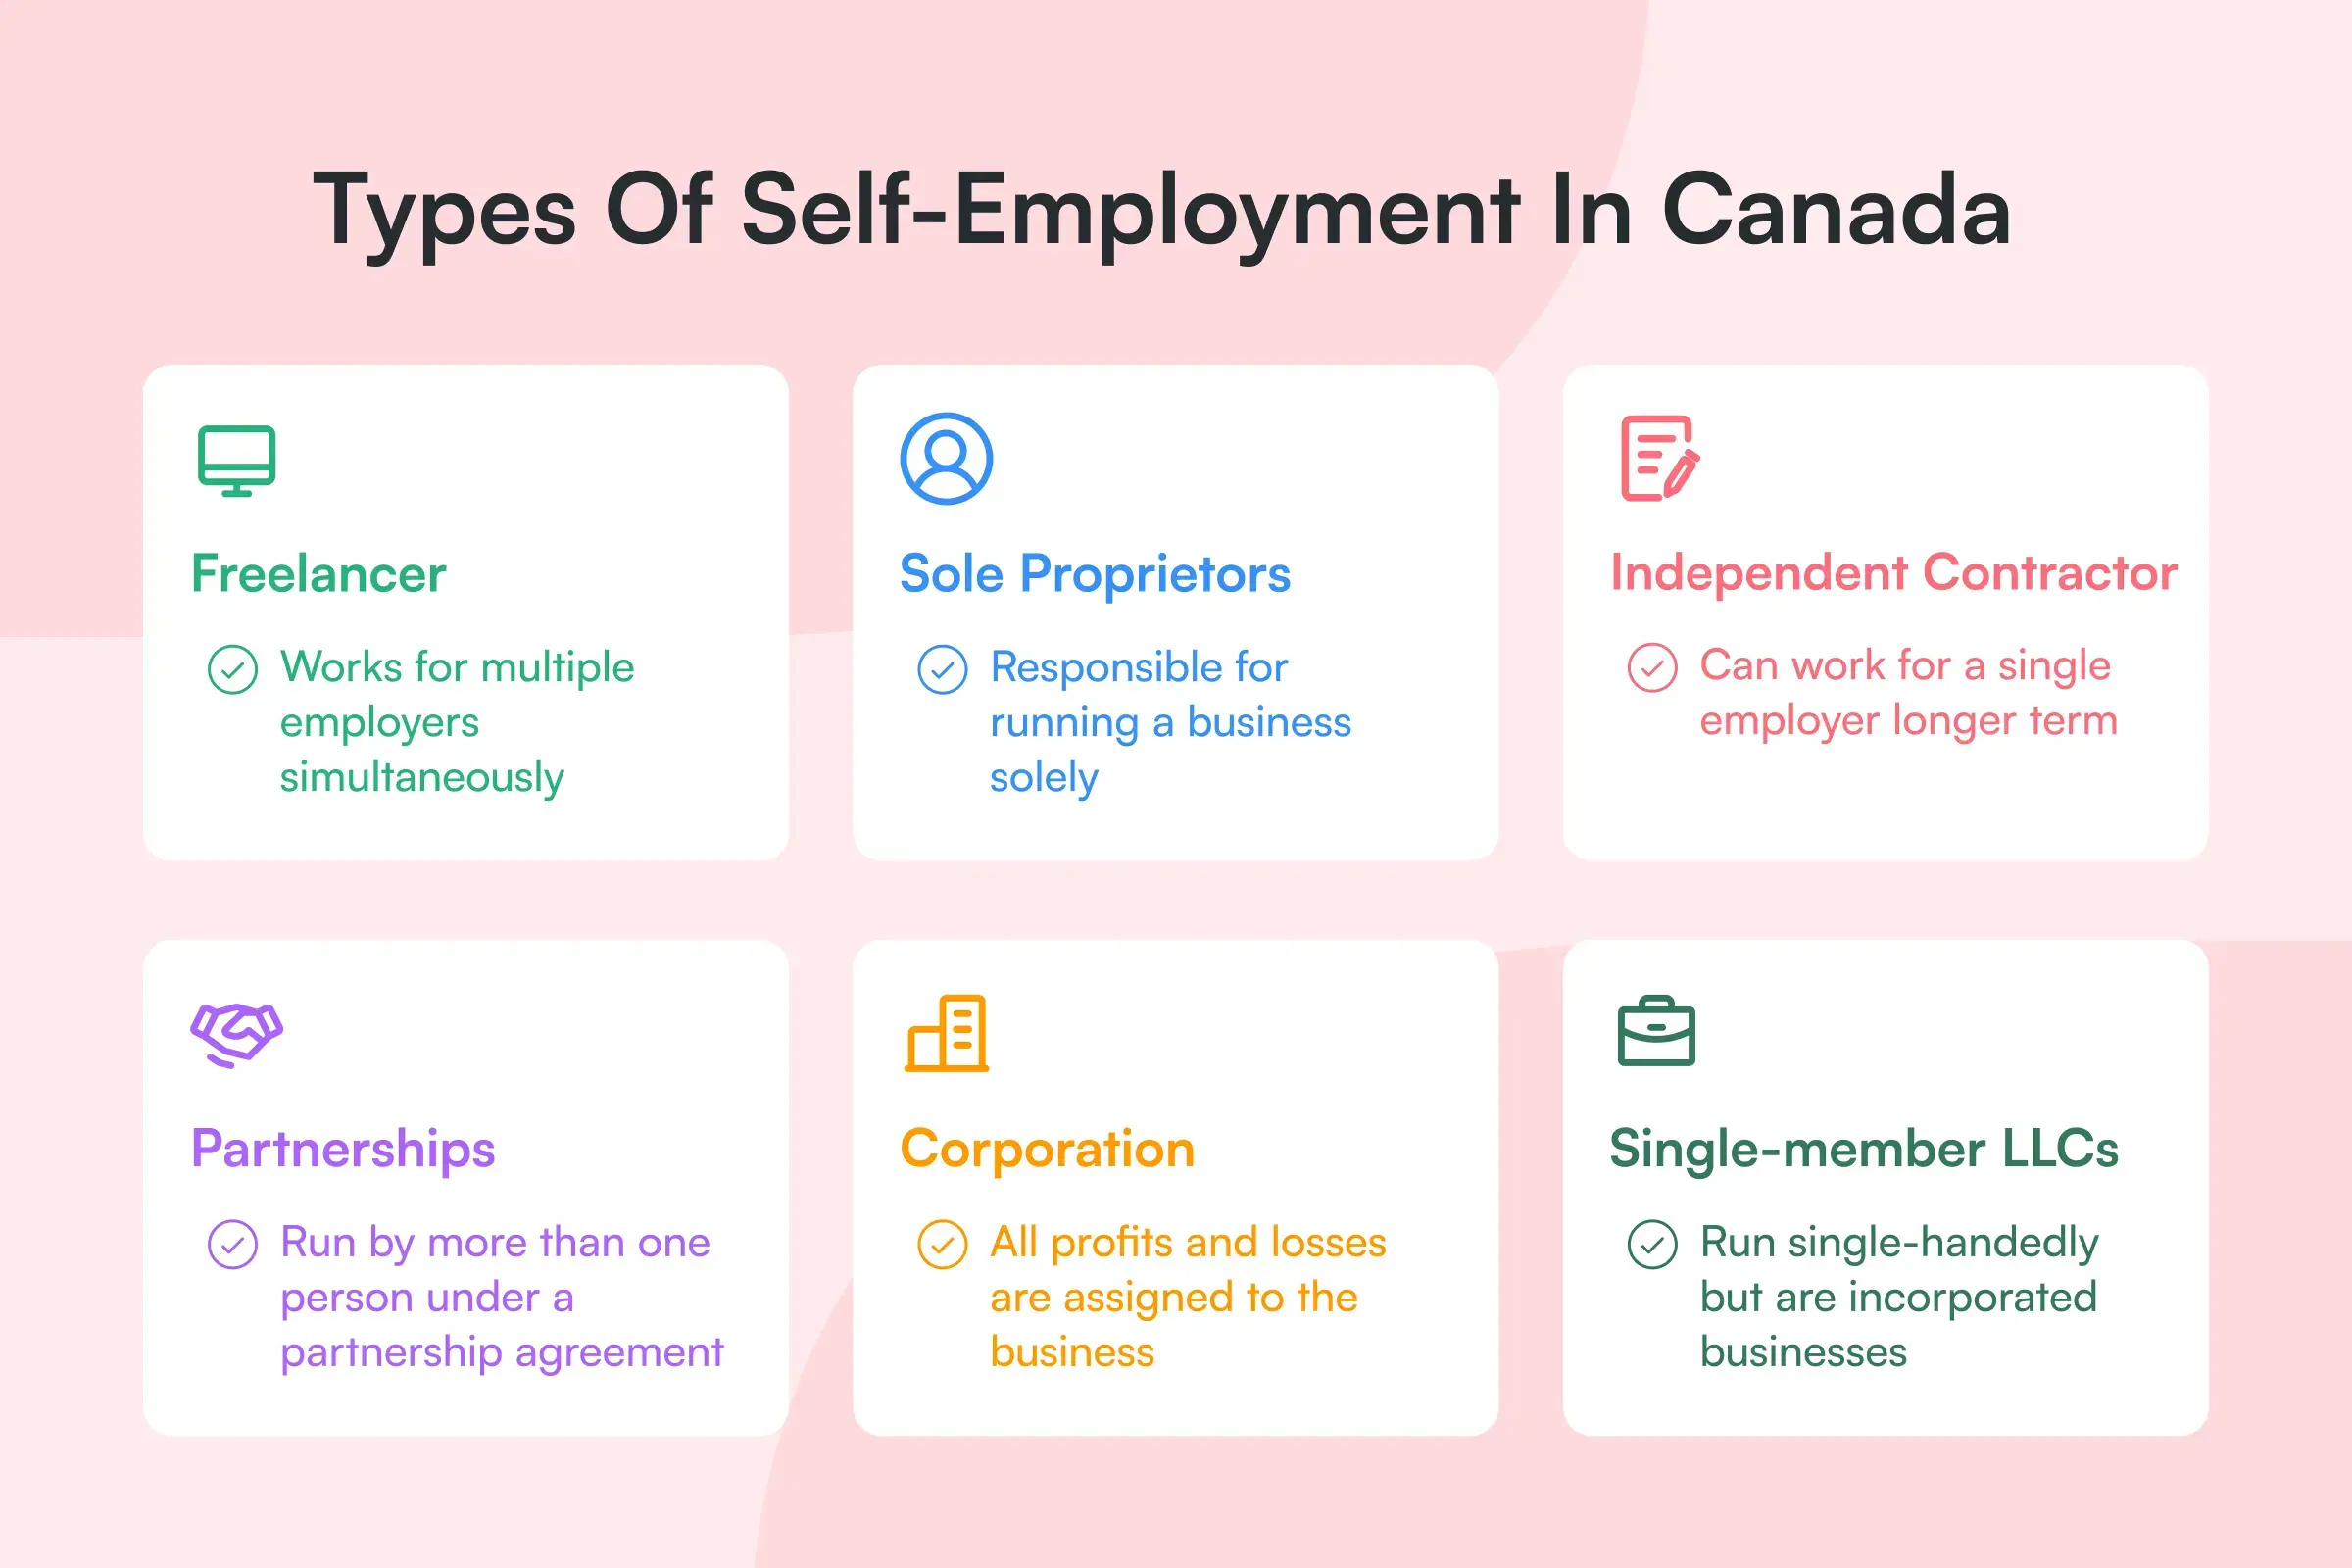 Types of self employment in Canada